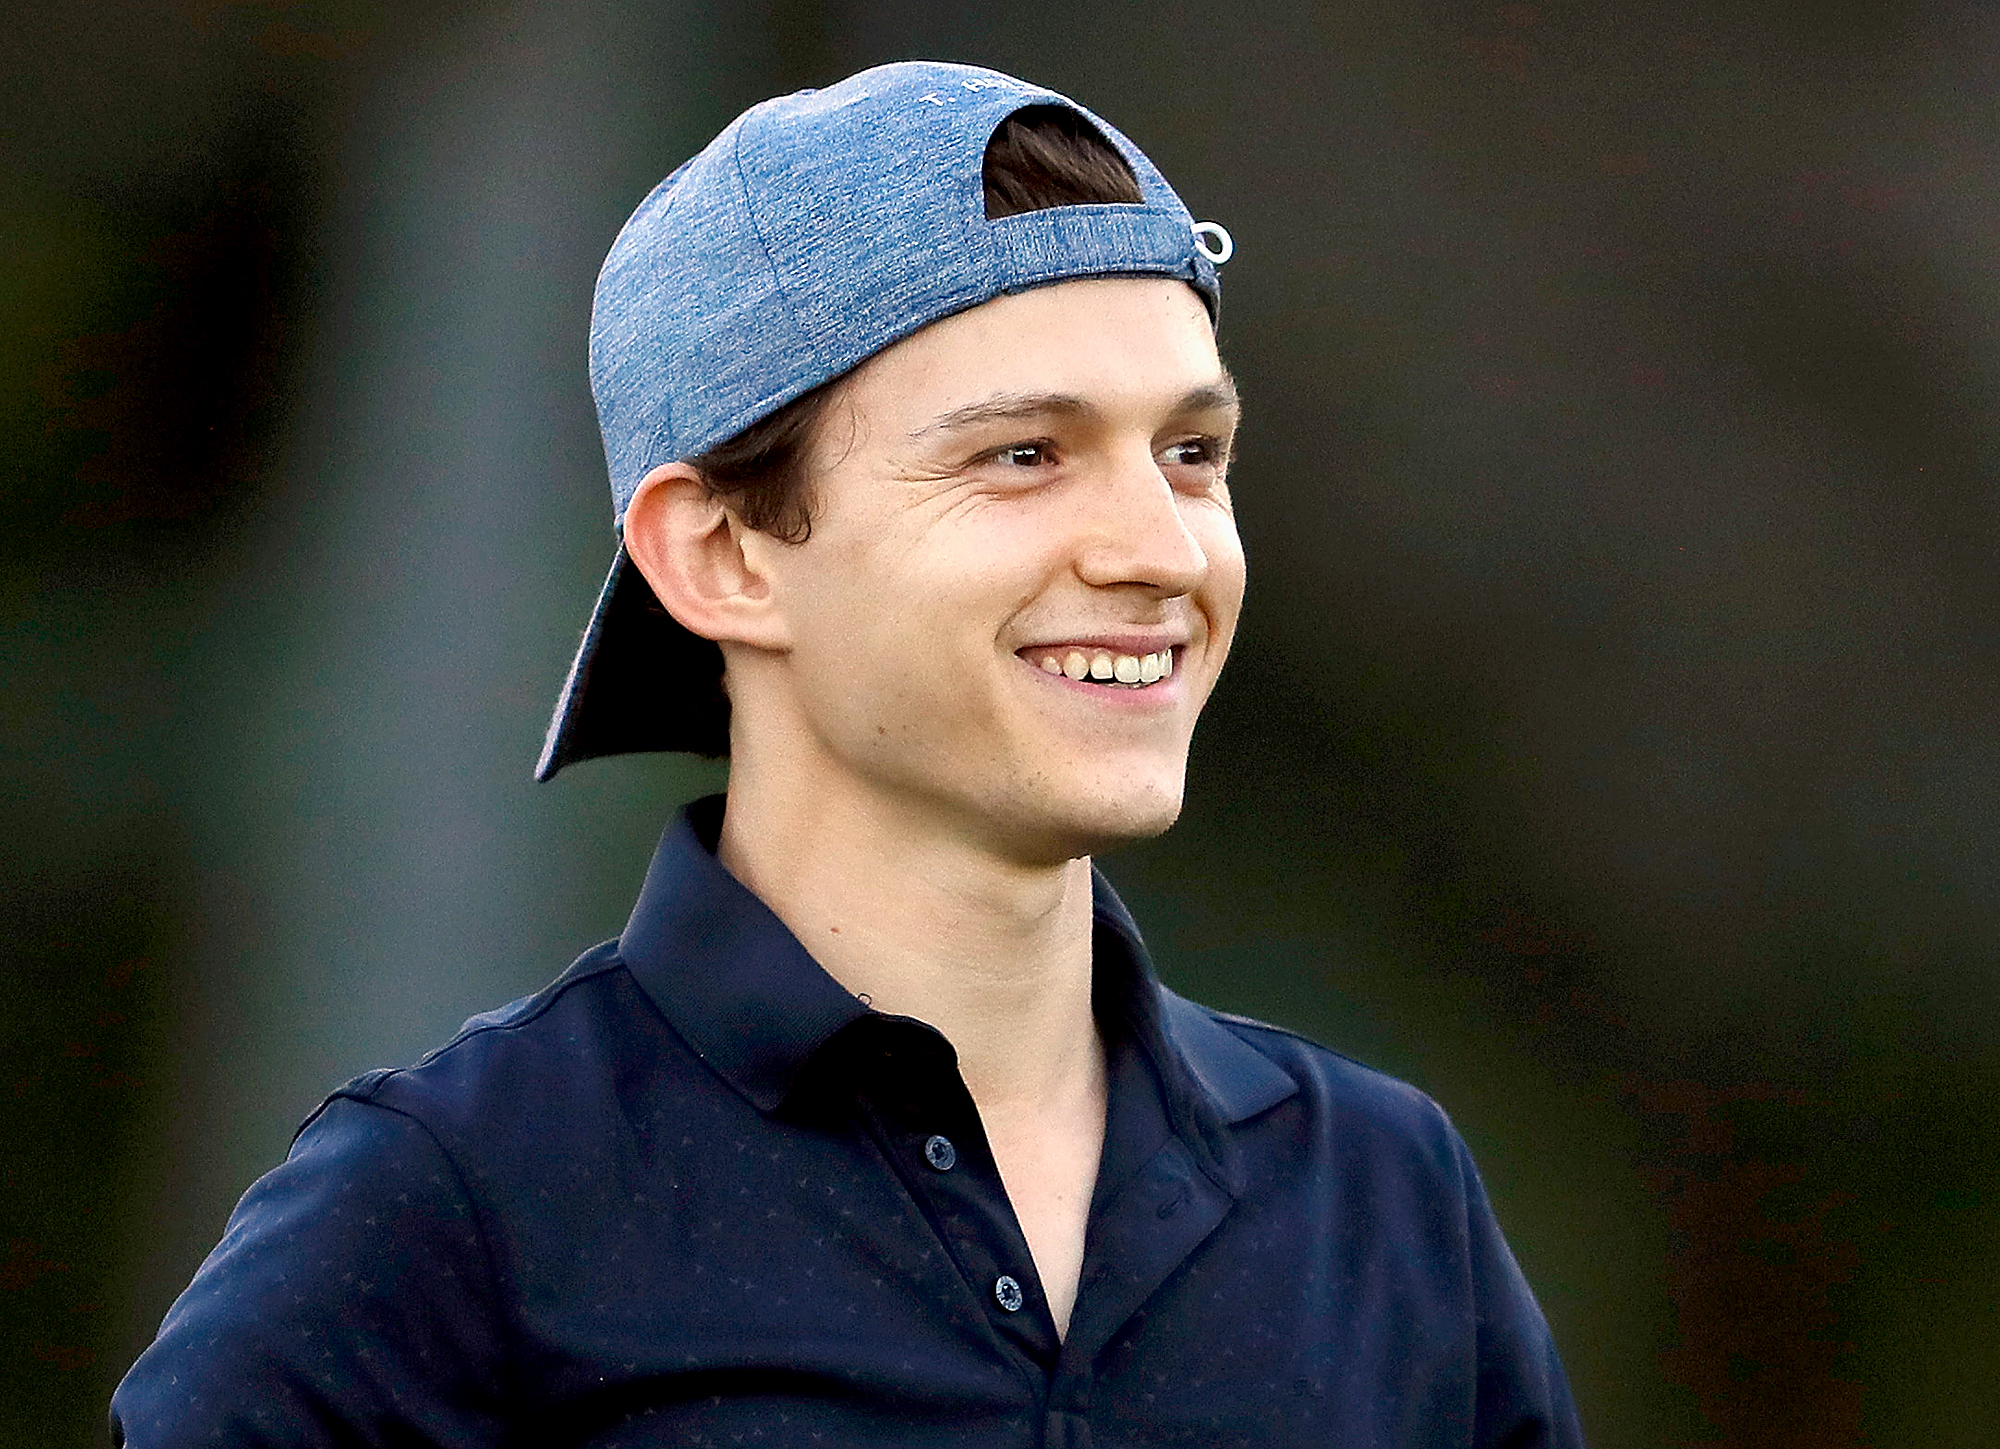 Tom Holland Turns 23: Watch ‘Spider-Man’ Star Spoil His Own Movies